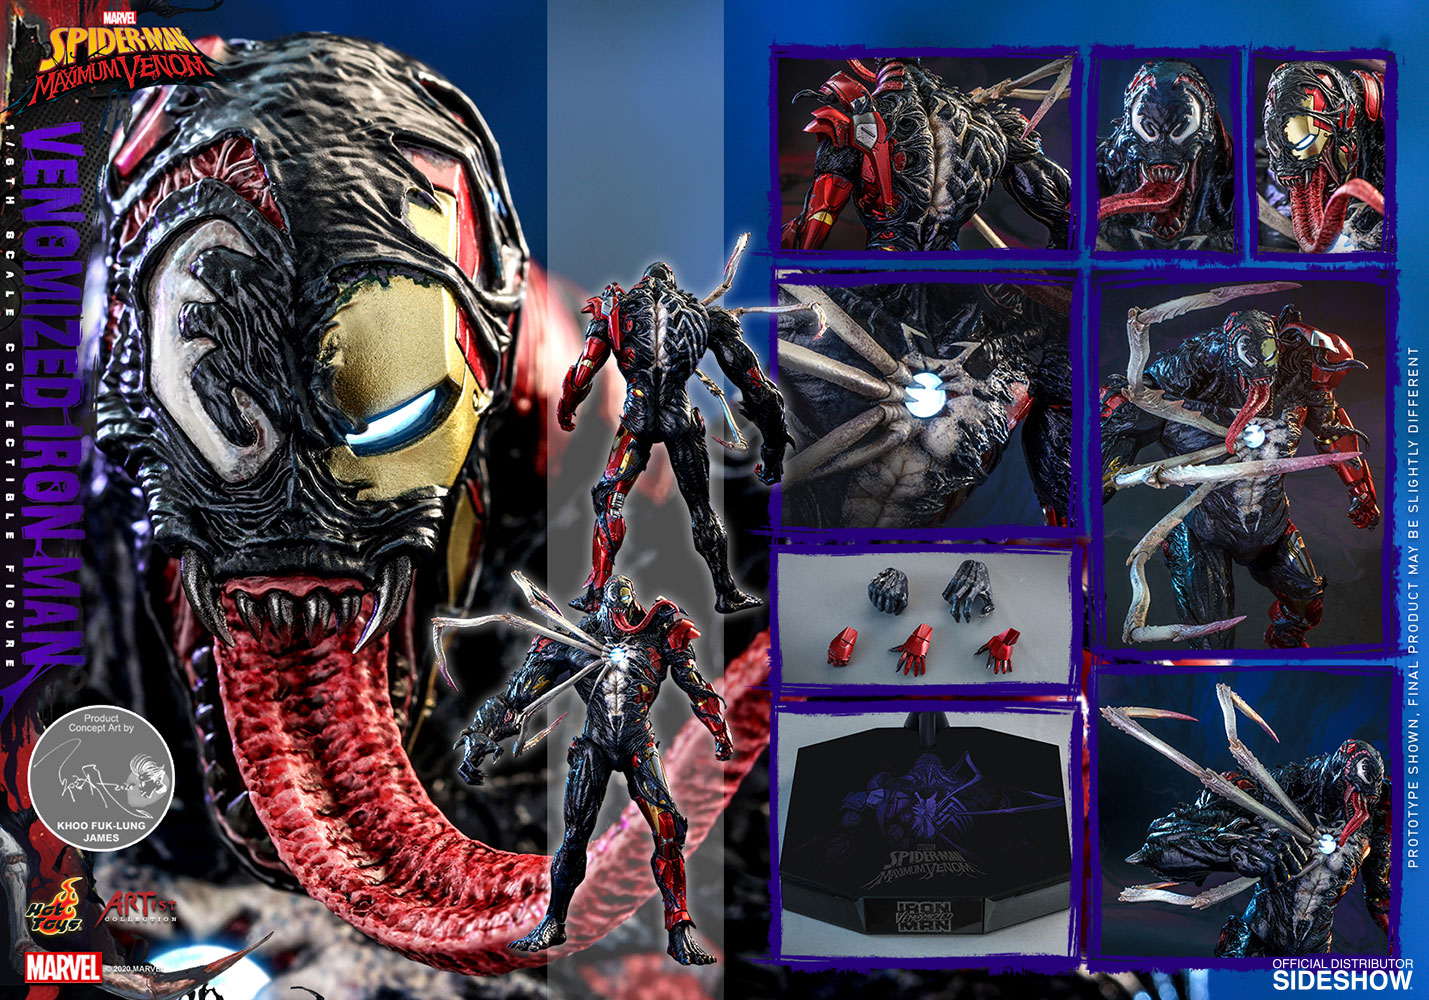 Venomized Iron Man Sixth Scale Figure By Hot Toys